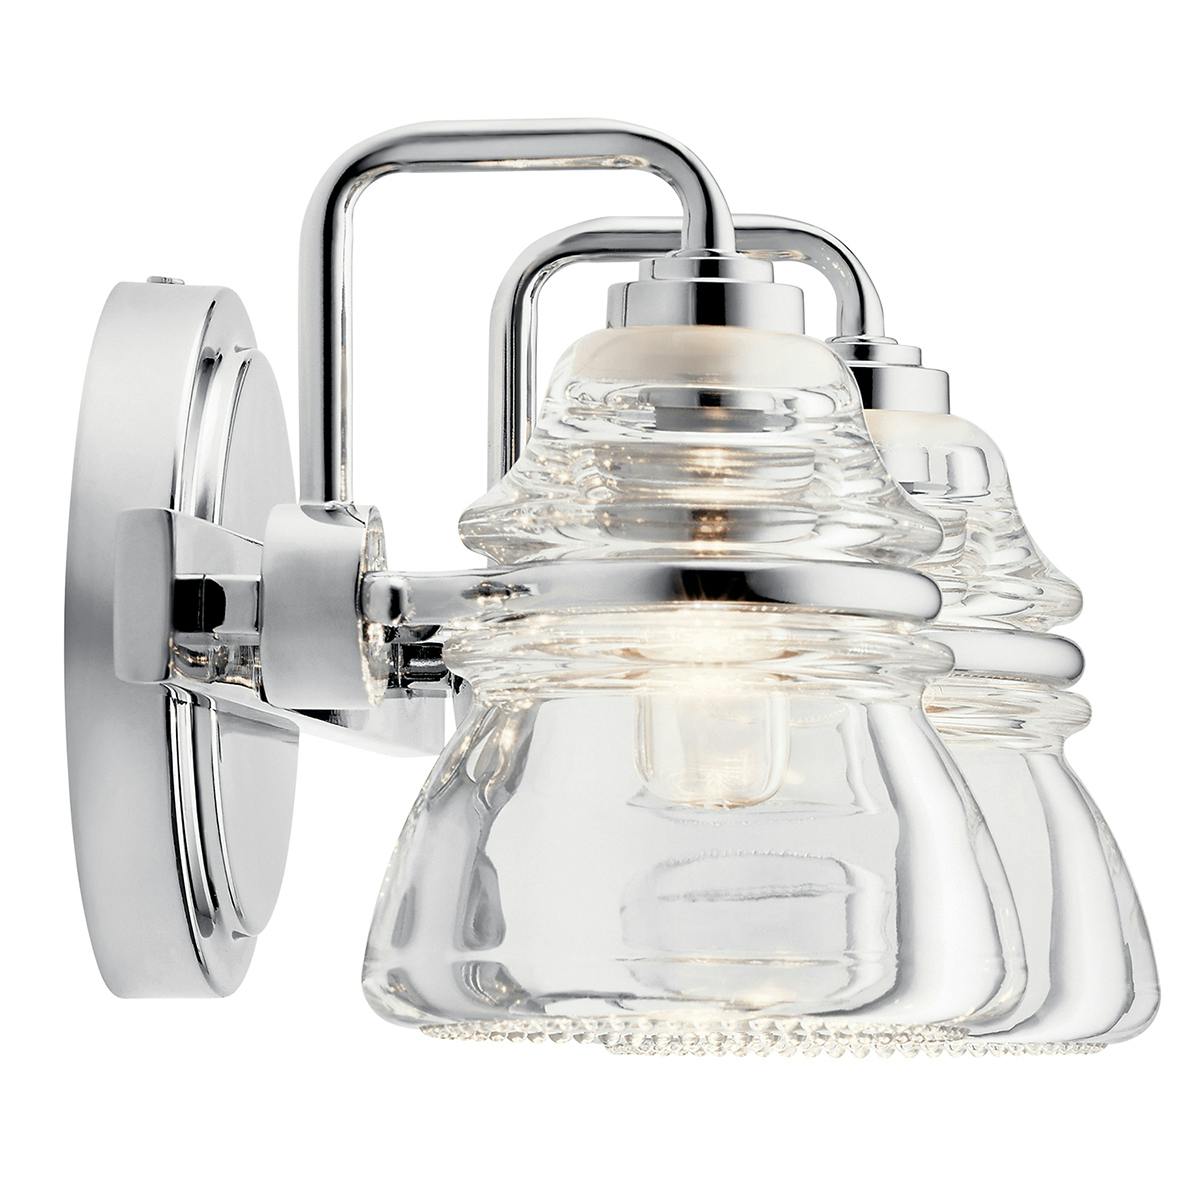 Profile view of the Talland 2 Light Vanity Light Chrome on a white background